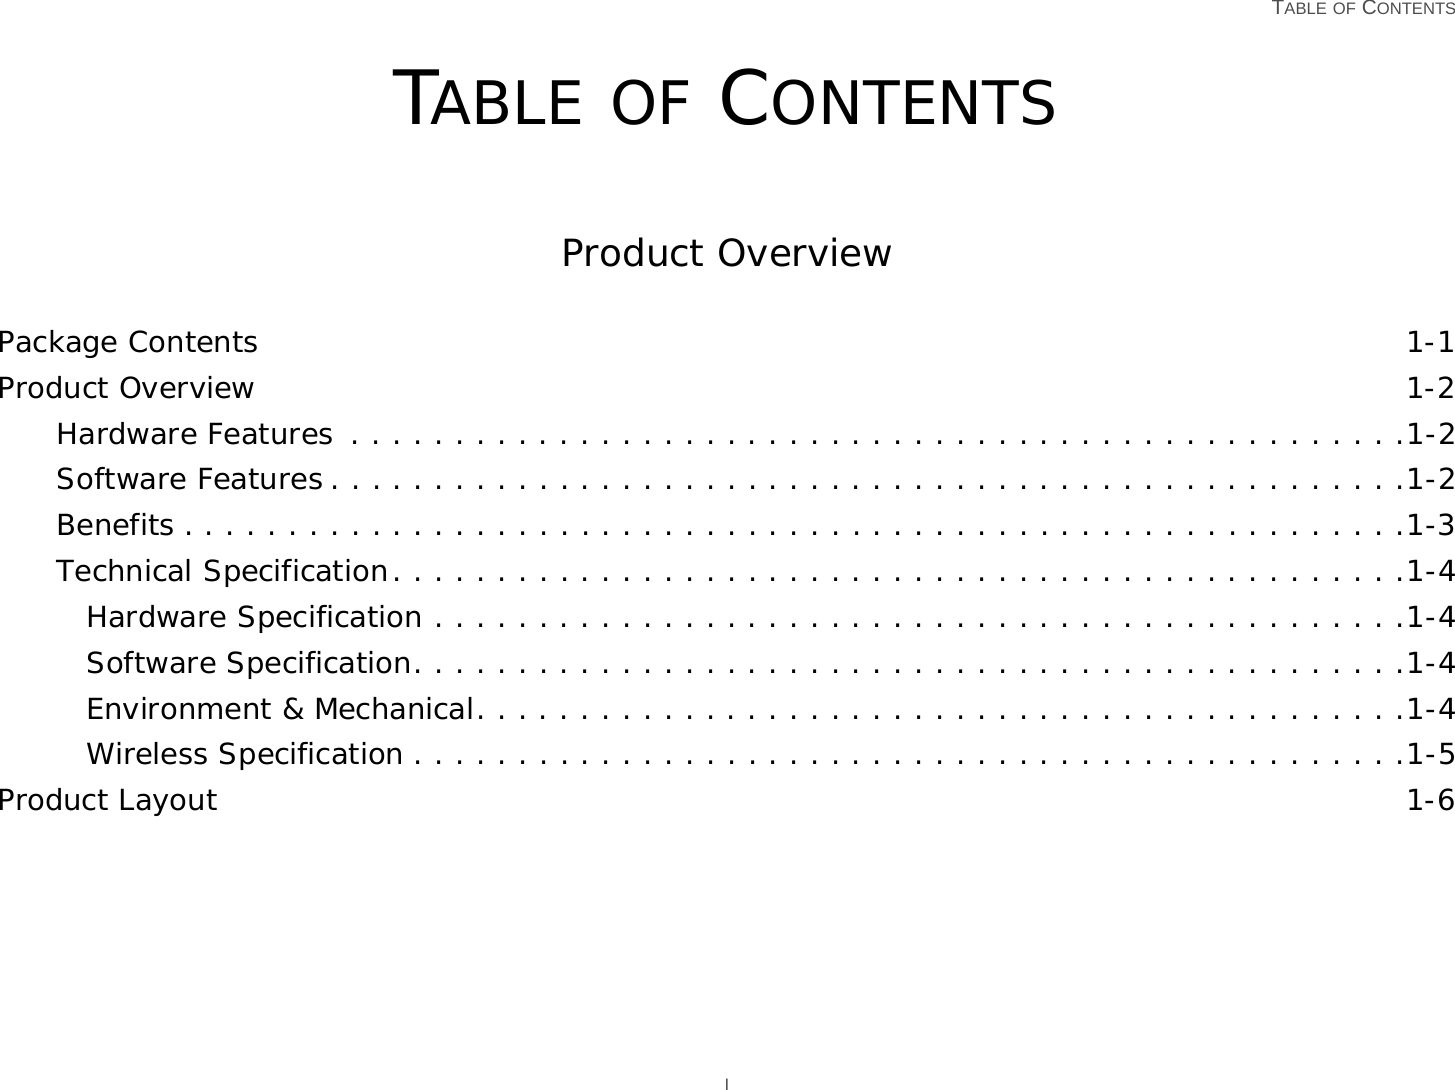   TABLE OF CONTENTS ITABLE OF CONTENTSProduct OverviewPackage Contents 1-1Product Overview 1-2Hardware Features  . . . . . . . . . . . . . . . . . . . . . . . . . . . . . . . . . . . . . . . . . . . . . . . . . . .1-2Software Features . . . . . . . . . . . . . . . . . . . . . . . . . . . . . . . . . . . . . . . . . . . . . . . . . . . .1-2Benefits . . . . . . . . . . . . . . . . . . . . . . . . . . . . . . . . . . . . . . . . . . . . . . . . . . . . . . . . . . .1-3Technical Specification. . . . . . . . . . . . . . . . . . . . . . . . . . . . . . . . . . . . . . . . . . . . . . . . .1-4Hardware Specification . . . . . . . . . . . . . . . . . . . . . . . . . . . . . . . . . . . . . . . . . . . . . . .1-4Software Specification. . . . . . . . . . . . . . . . . . . . . . . . . . . . . . . . . . . . . . . . . . . . . . . .1-4Environment &amp; Mechanical. . . . . . . . . . . . . . . . . . . . . . . . . . . . . . . . . . . . . . . . . . . . .1-4Wireless Specification . . . . . . . . . . . . . . . . . . . . . . . . . . . . . . . . . . . . . . . . . . . . . . . .1-5Product Layout 1-6